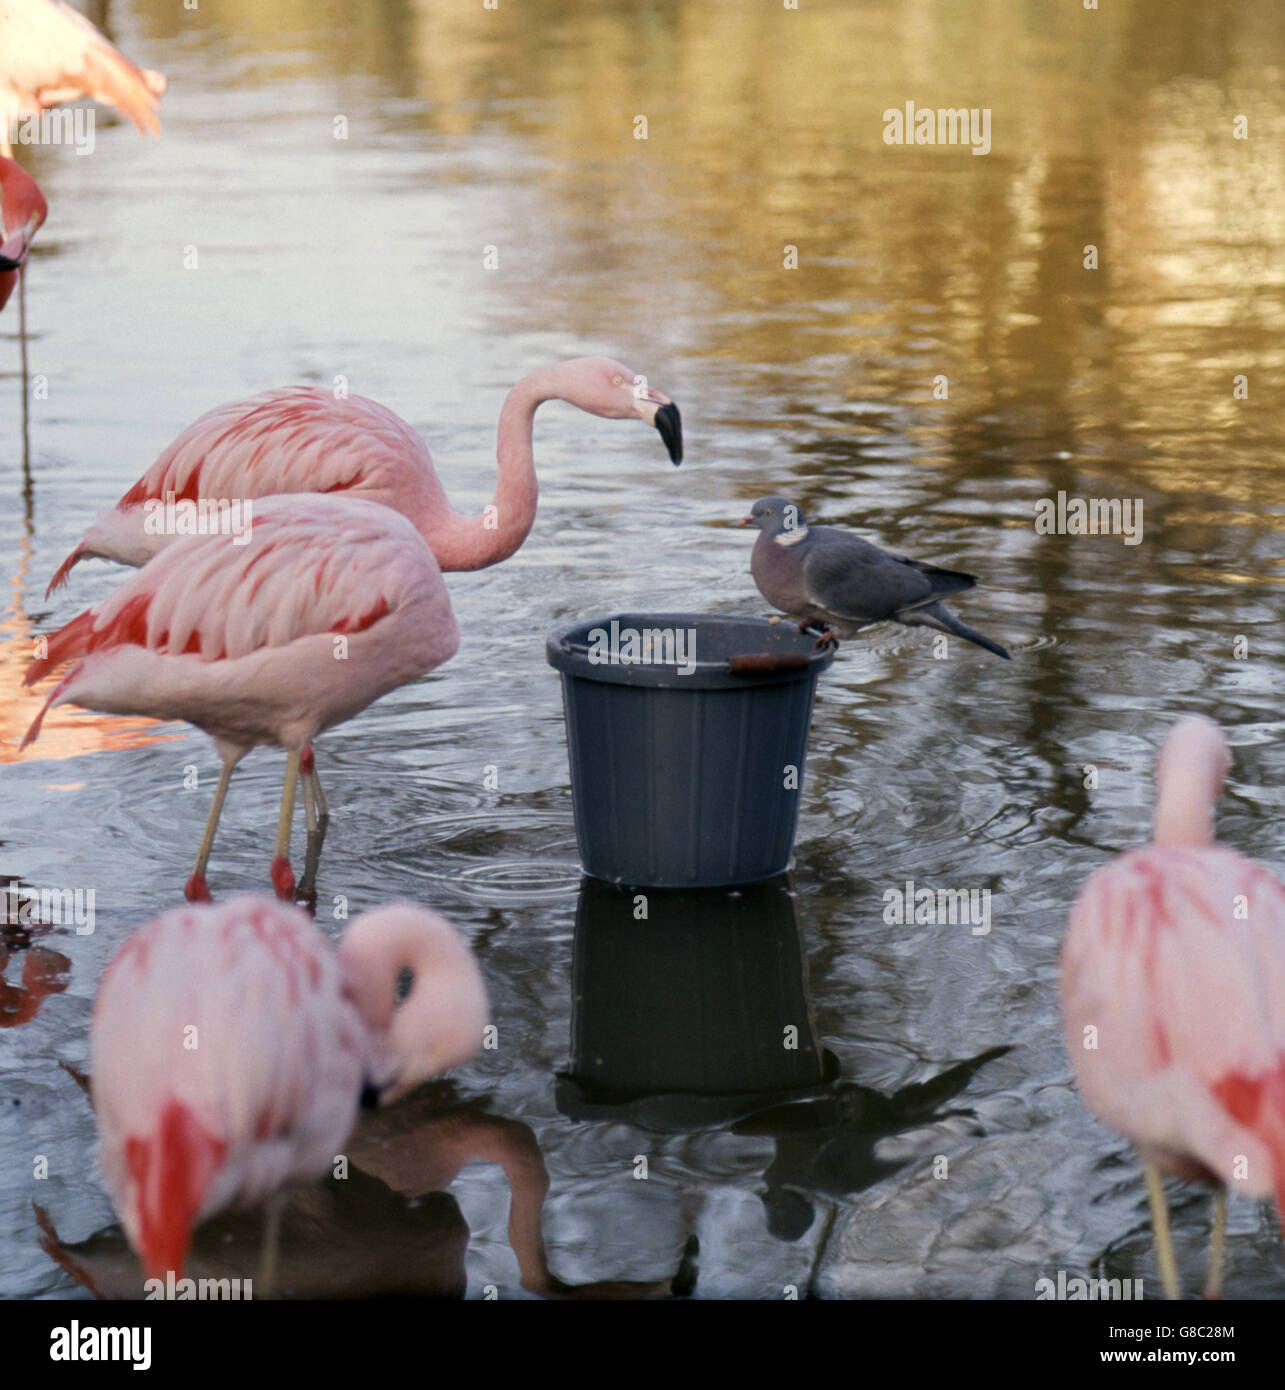 Animals - London Zoo - Regent's Park, London. A pigeon shares a food bucket with the Flamingos at London Zoo, Regent's Park, London. Stock Photo